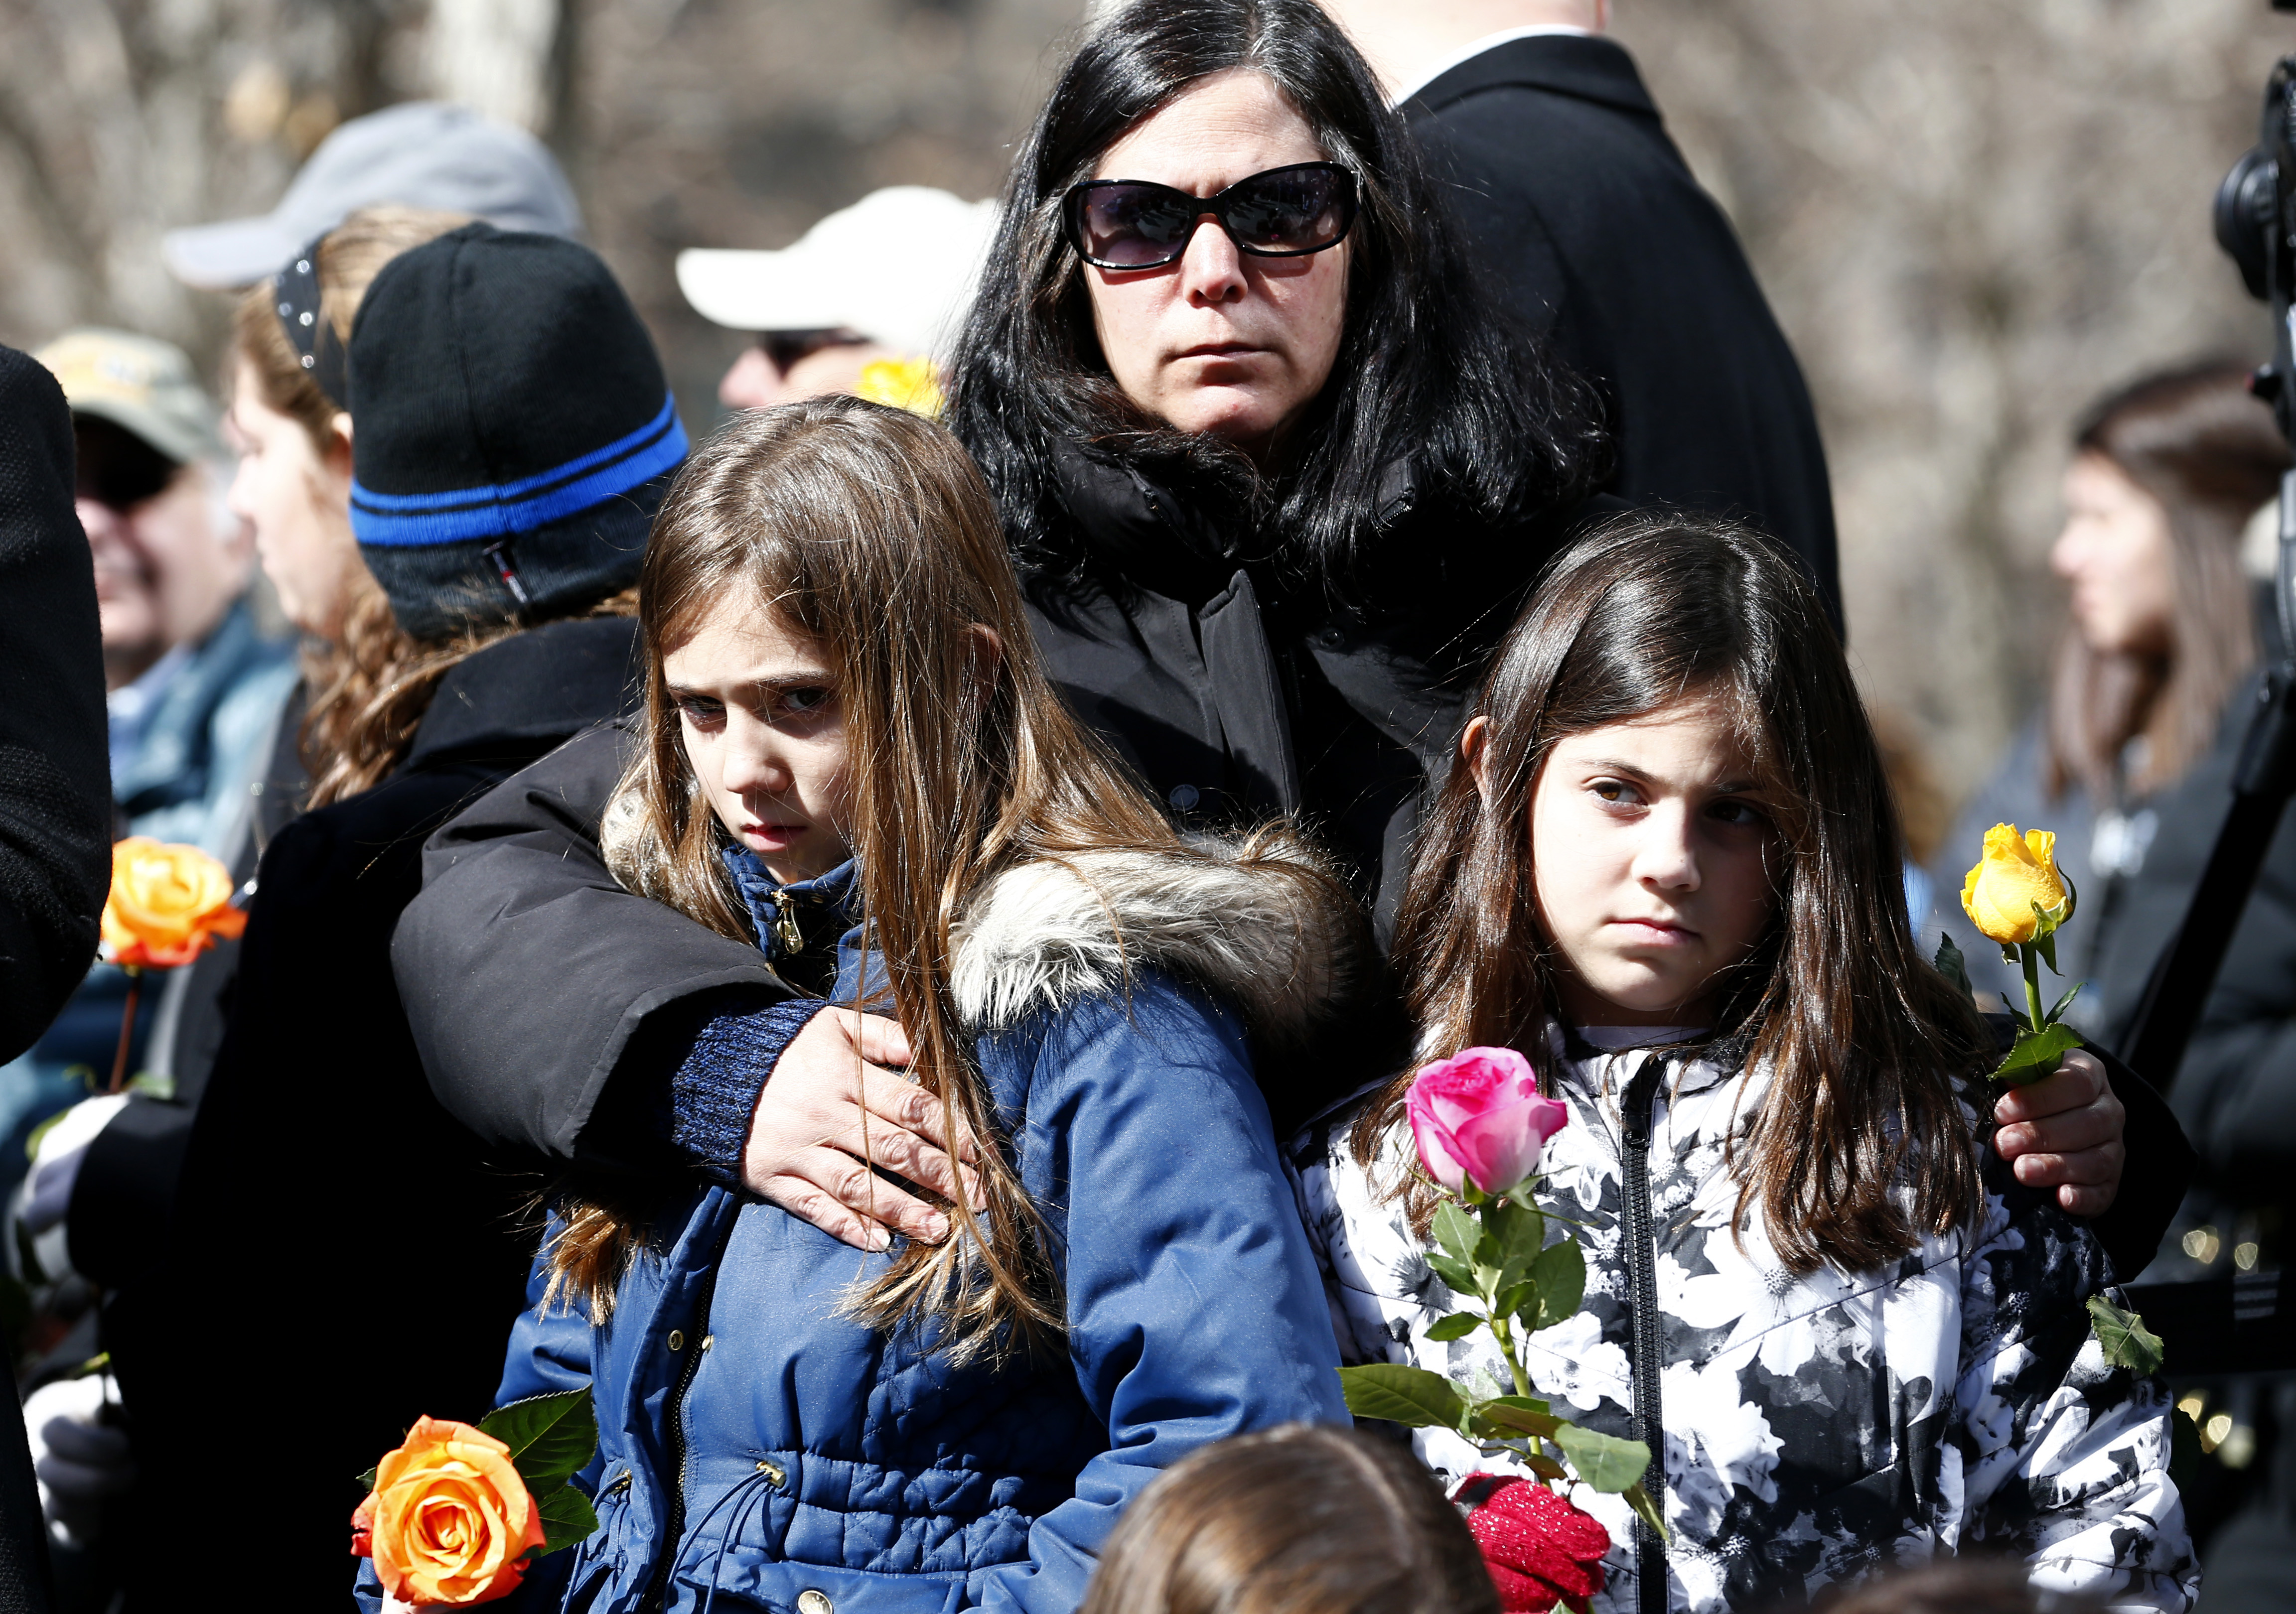 A woman embraces two girls as they stand during a moment of silence on Memorial plaza. The three of them are holding multicolored roses.